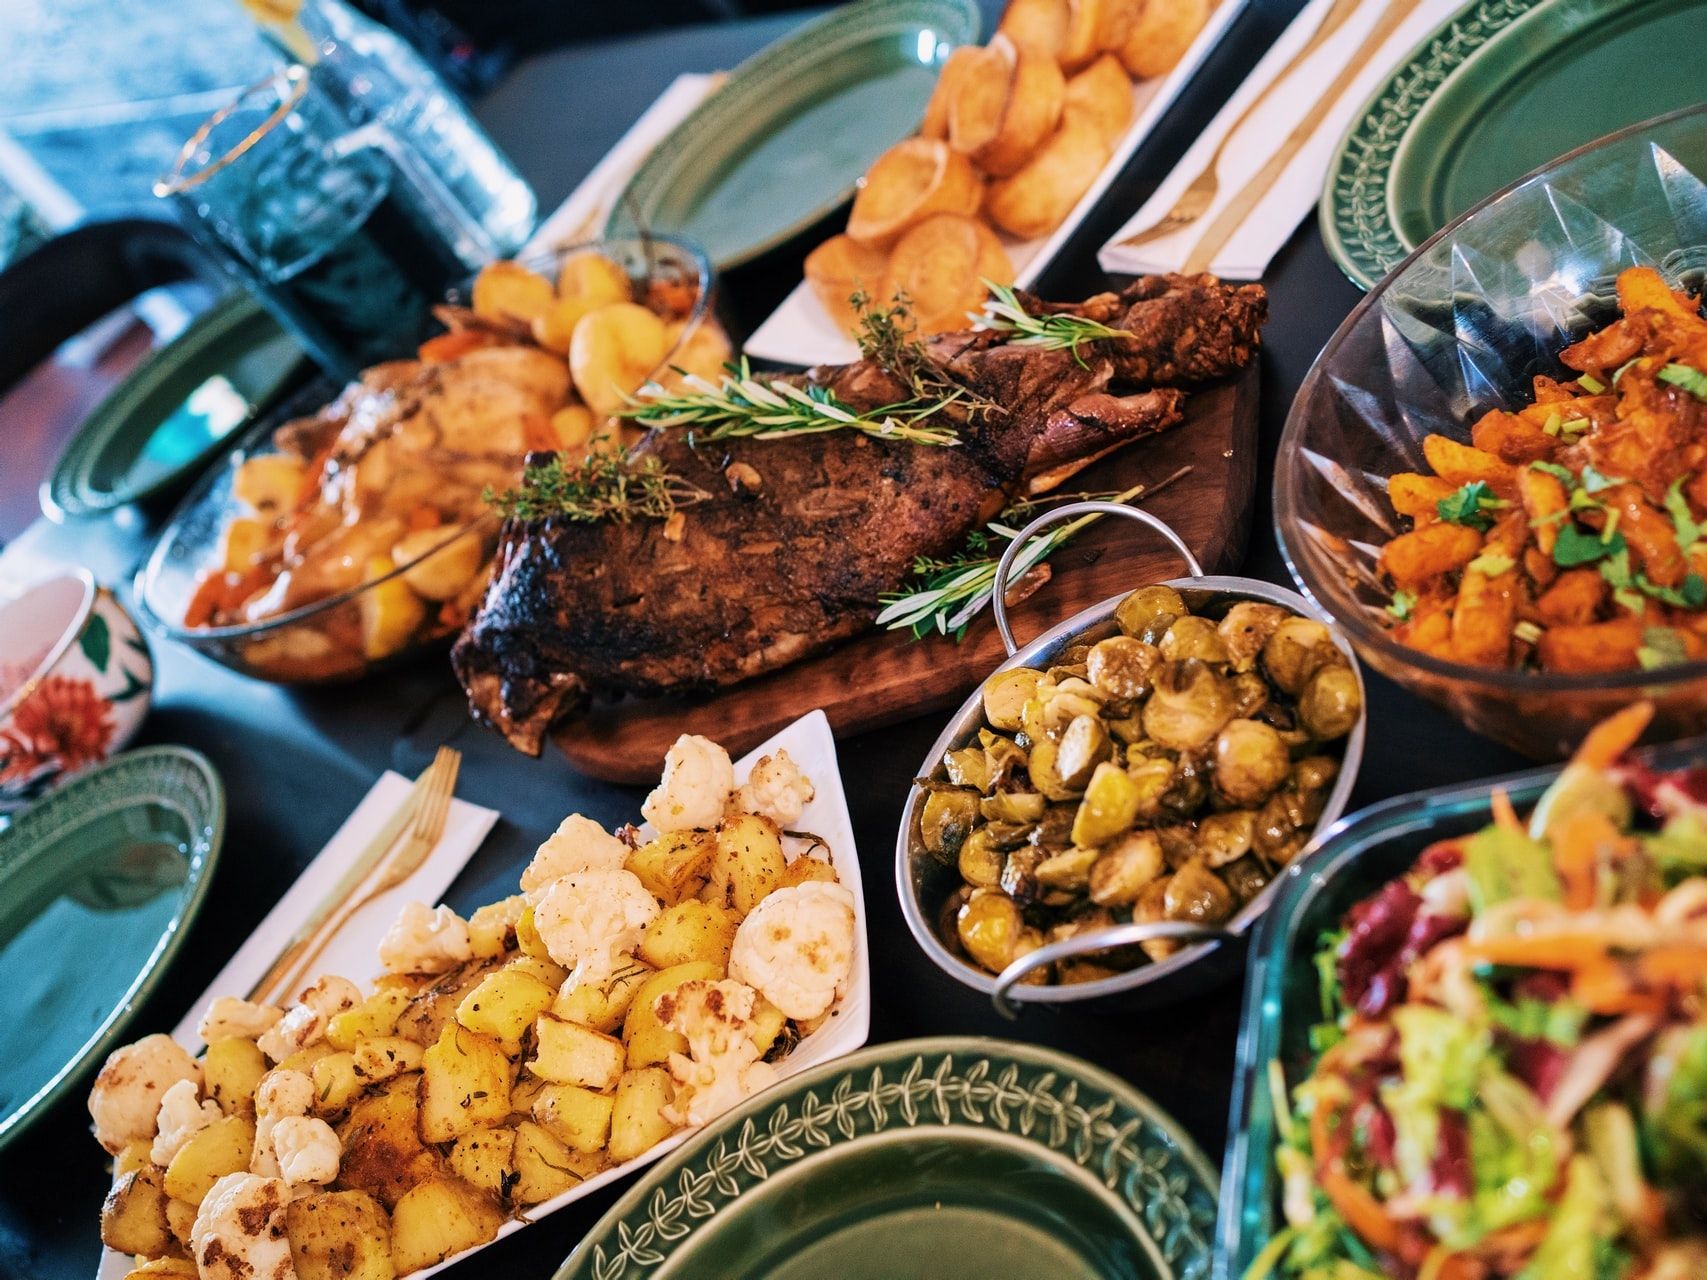 A photo tilted diagonally shows a table full of different food dishes